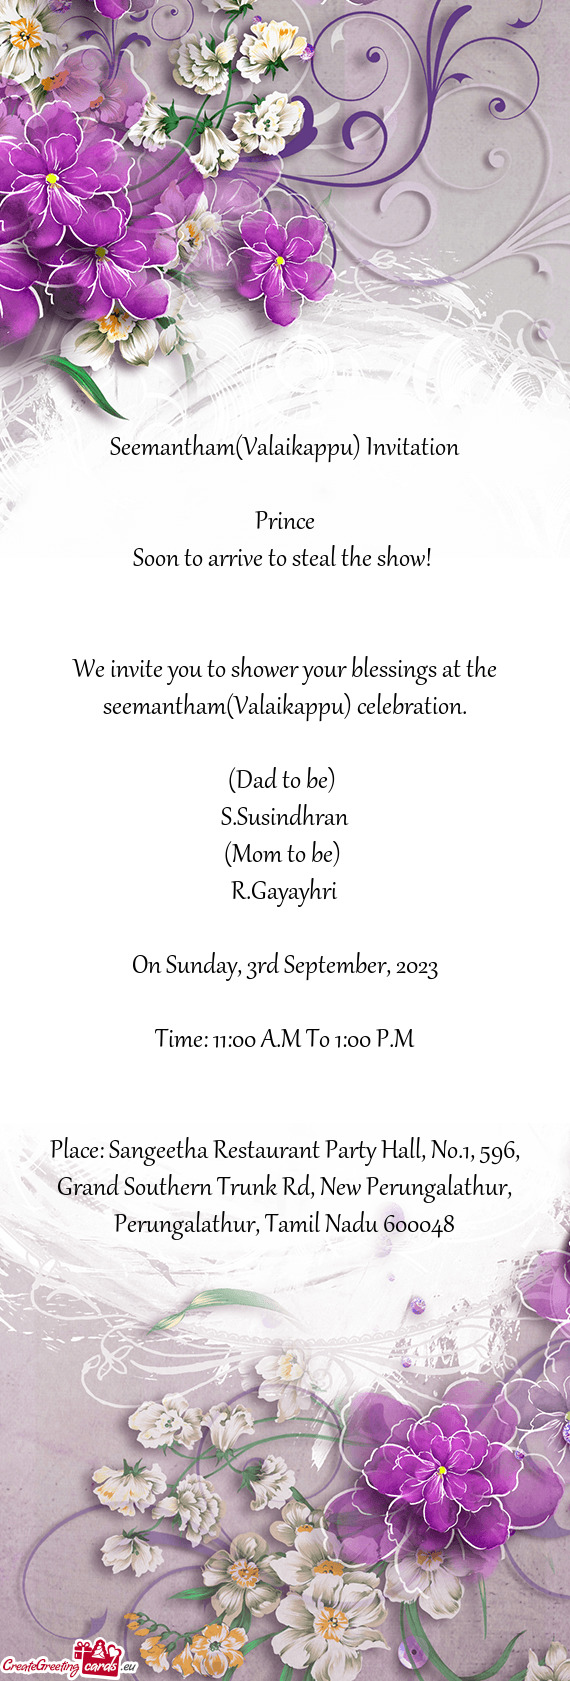 We invite you to shower your blessings at the seemantham(Valaikappu) celebration